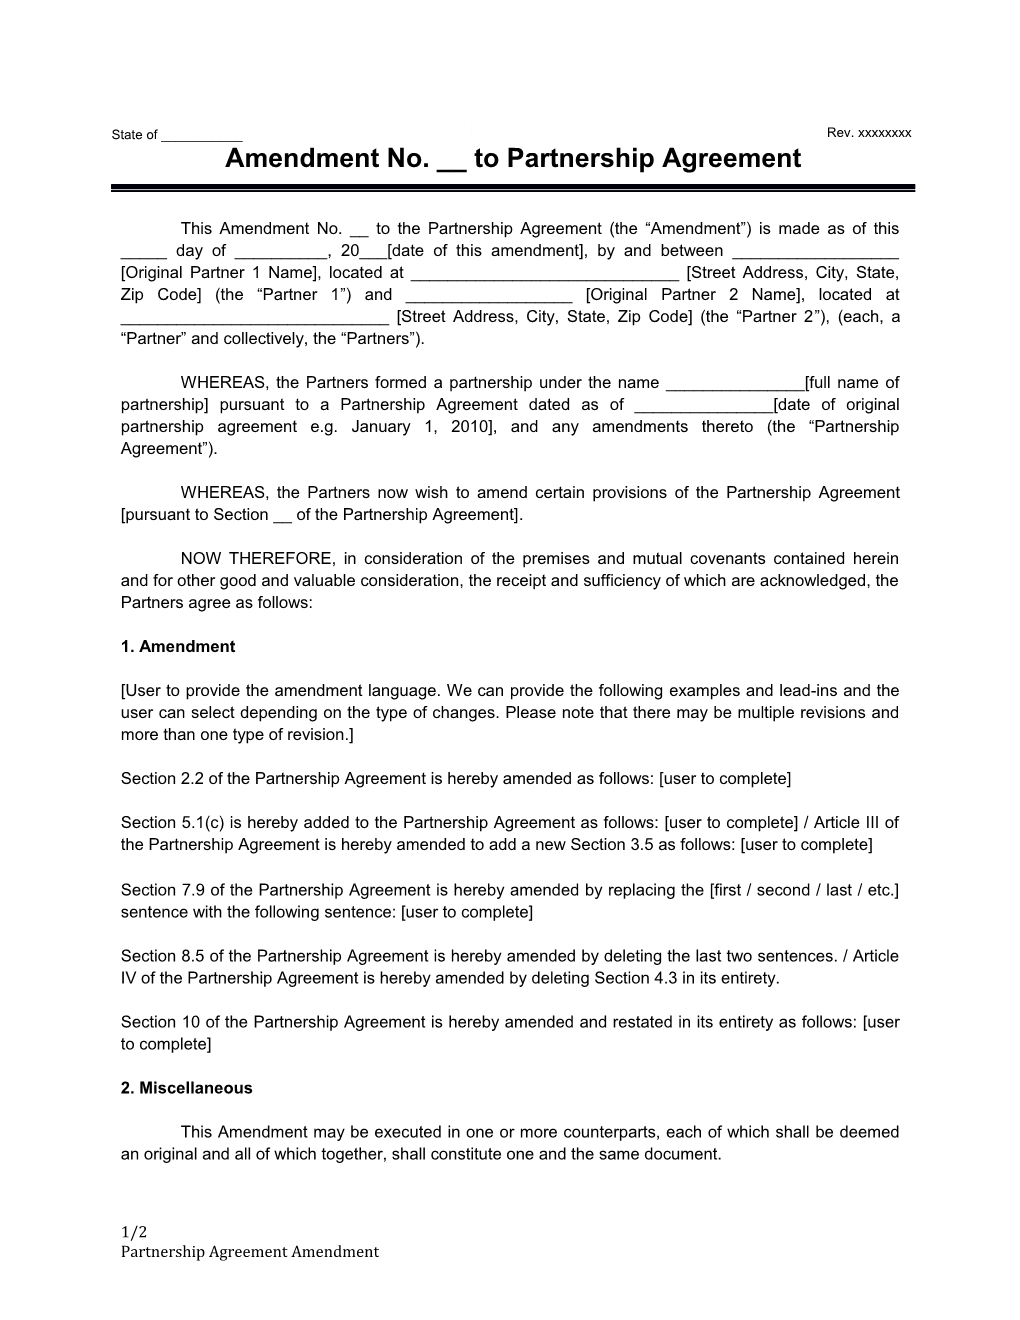 This Amendment No. __ SC2 to the Partnership Agreement (The Amendment ) Is Made As of This